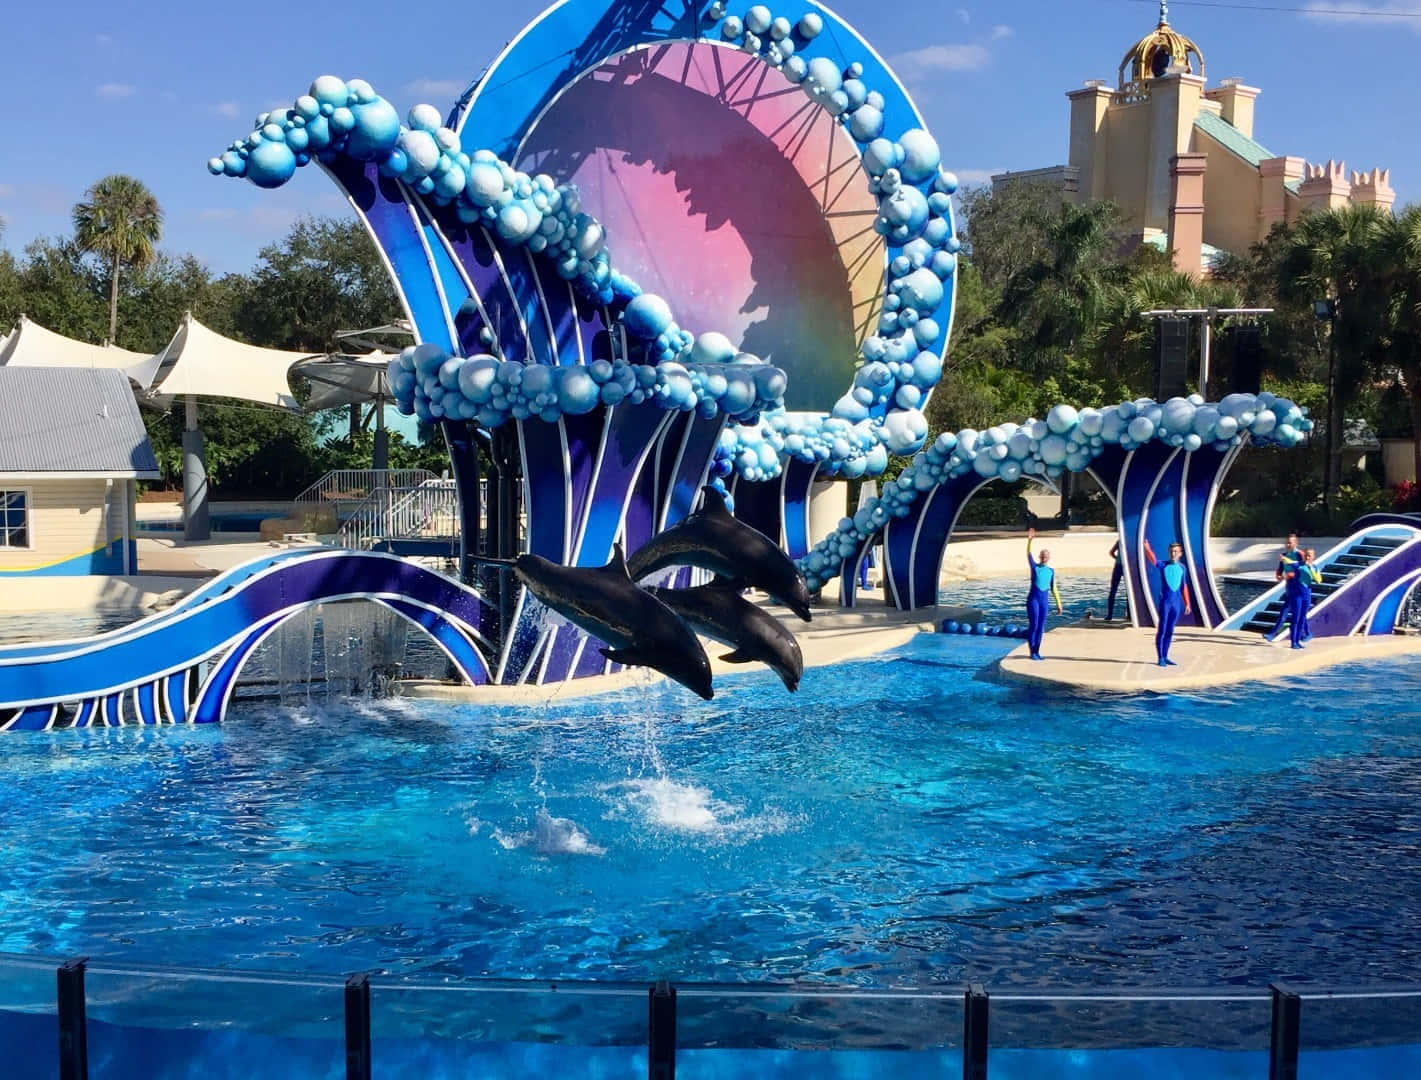 A view of the SeaWorld park in Orlando, Florida.